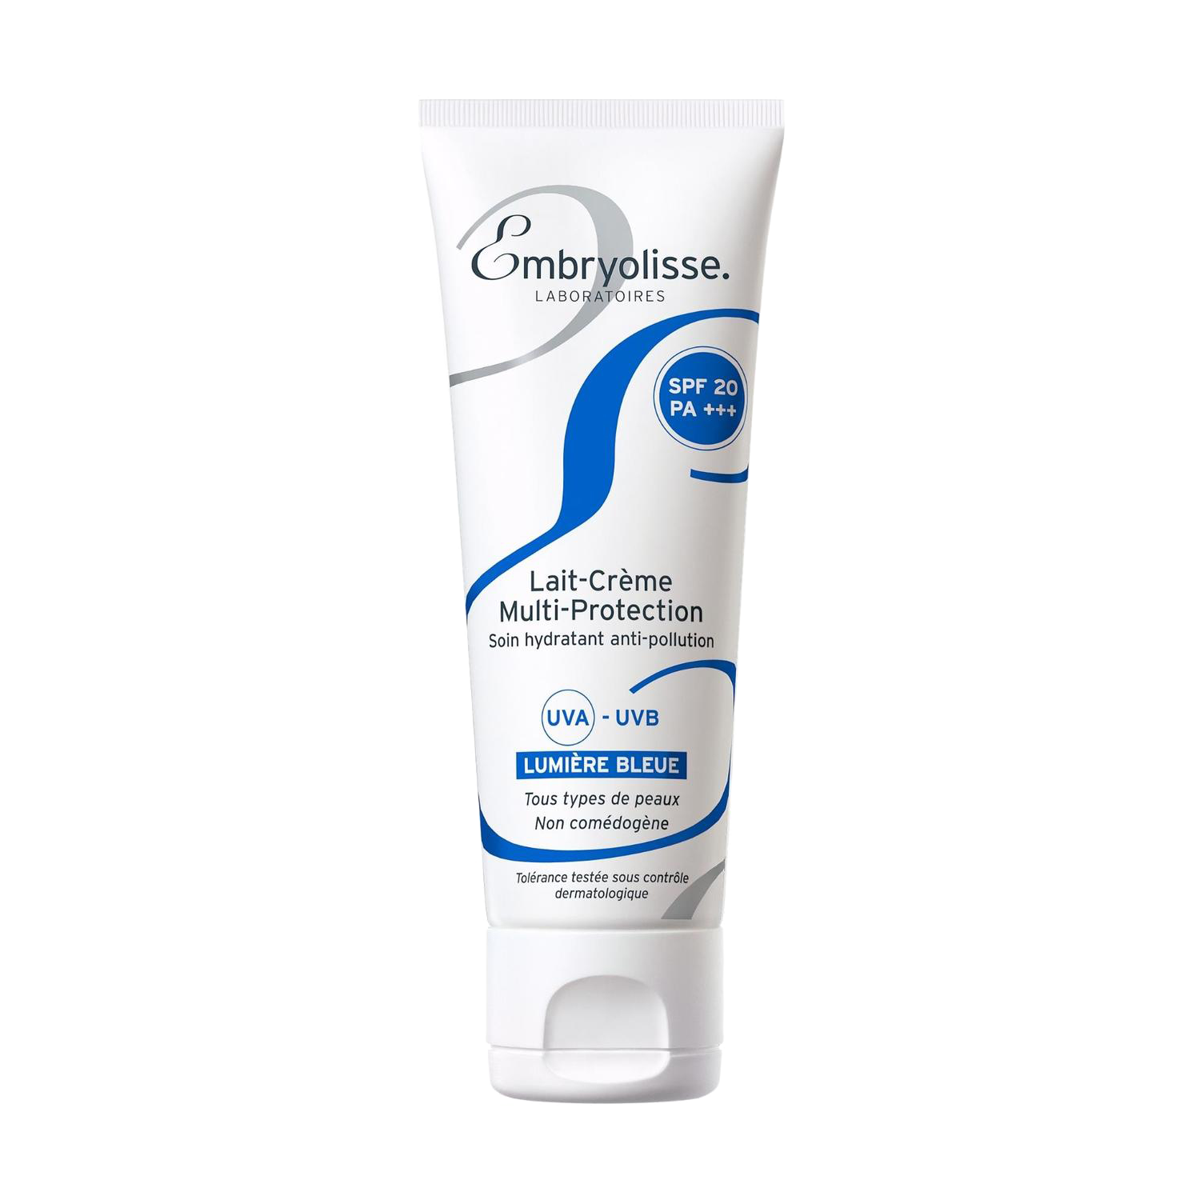 Embryolisse Lait Creme Multiprotection Spf20 40ml